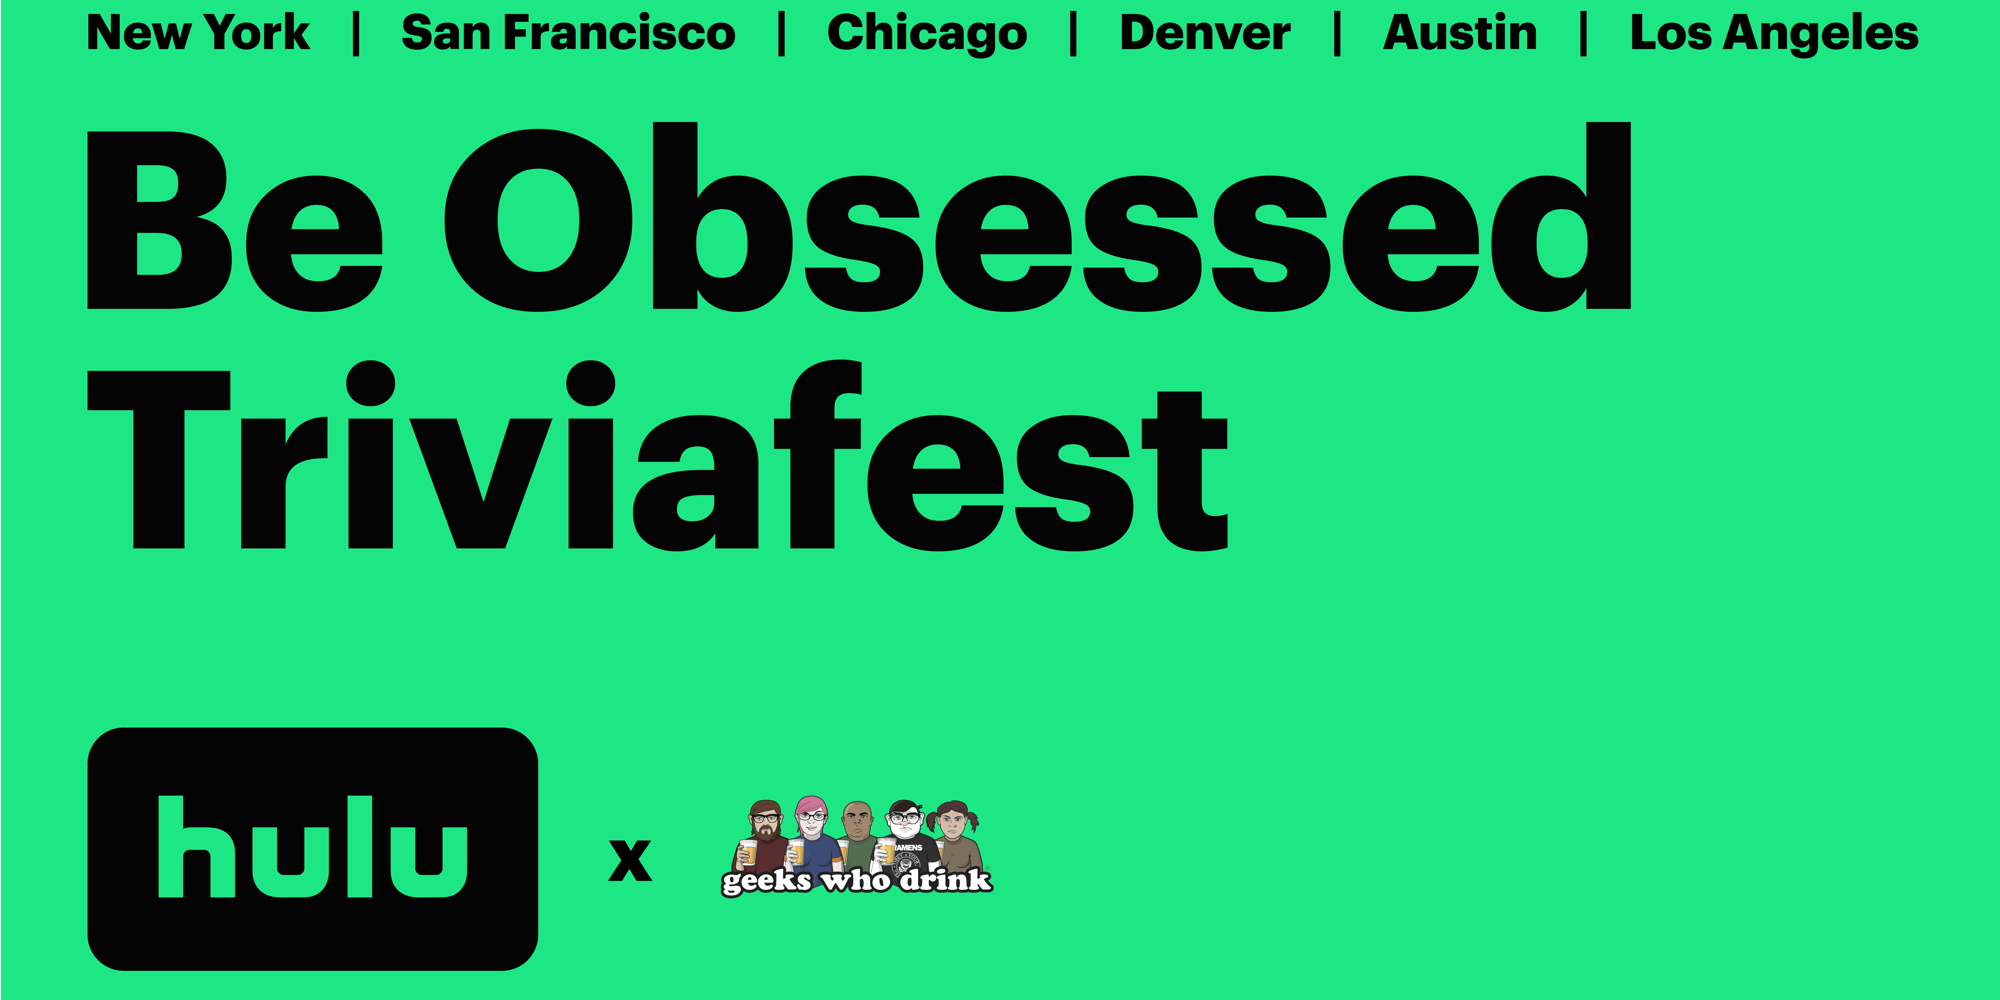 Be Obsessed Triviafest NY: A Geeks Who Drink Trivia Event sponsored by Hulu promotional image